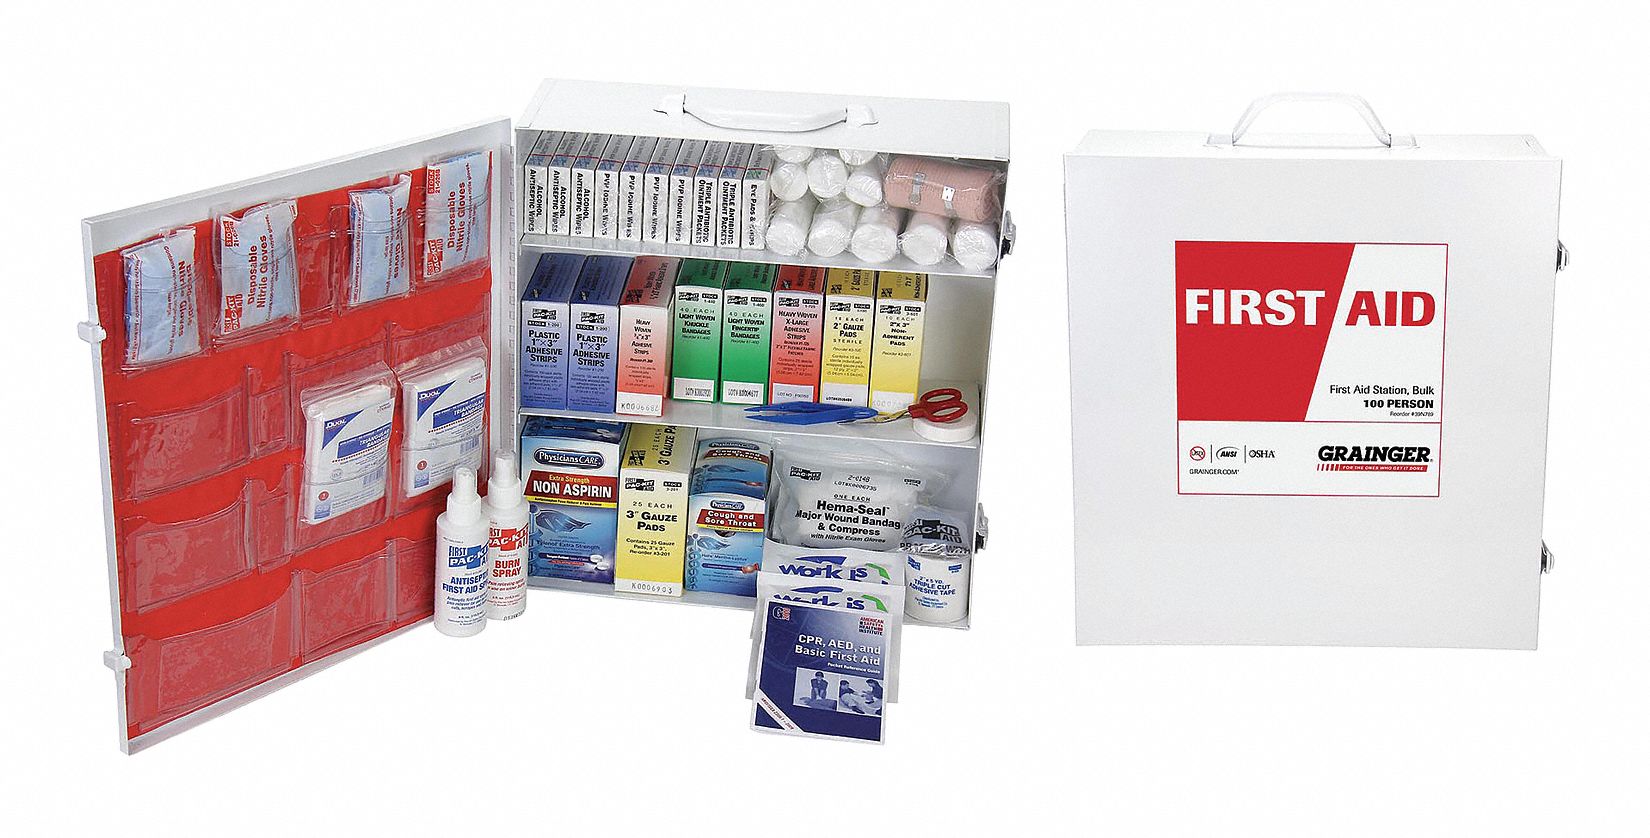 Industrial, 25 People Served per Kit, First Aid Kit - 488G80